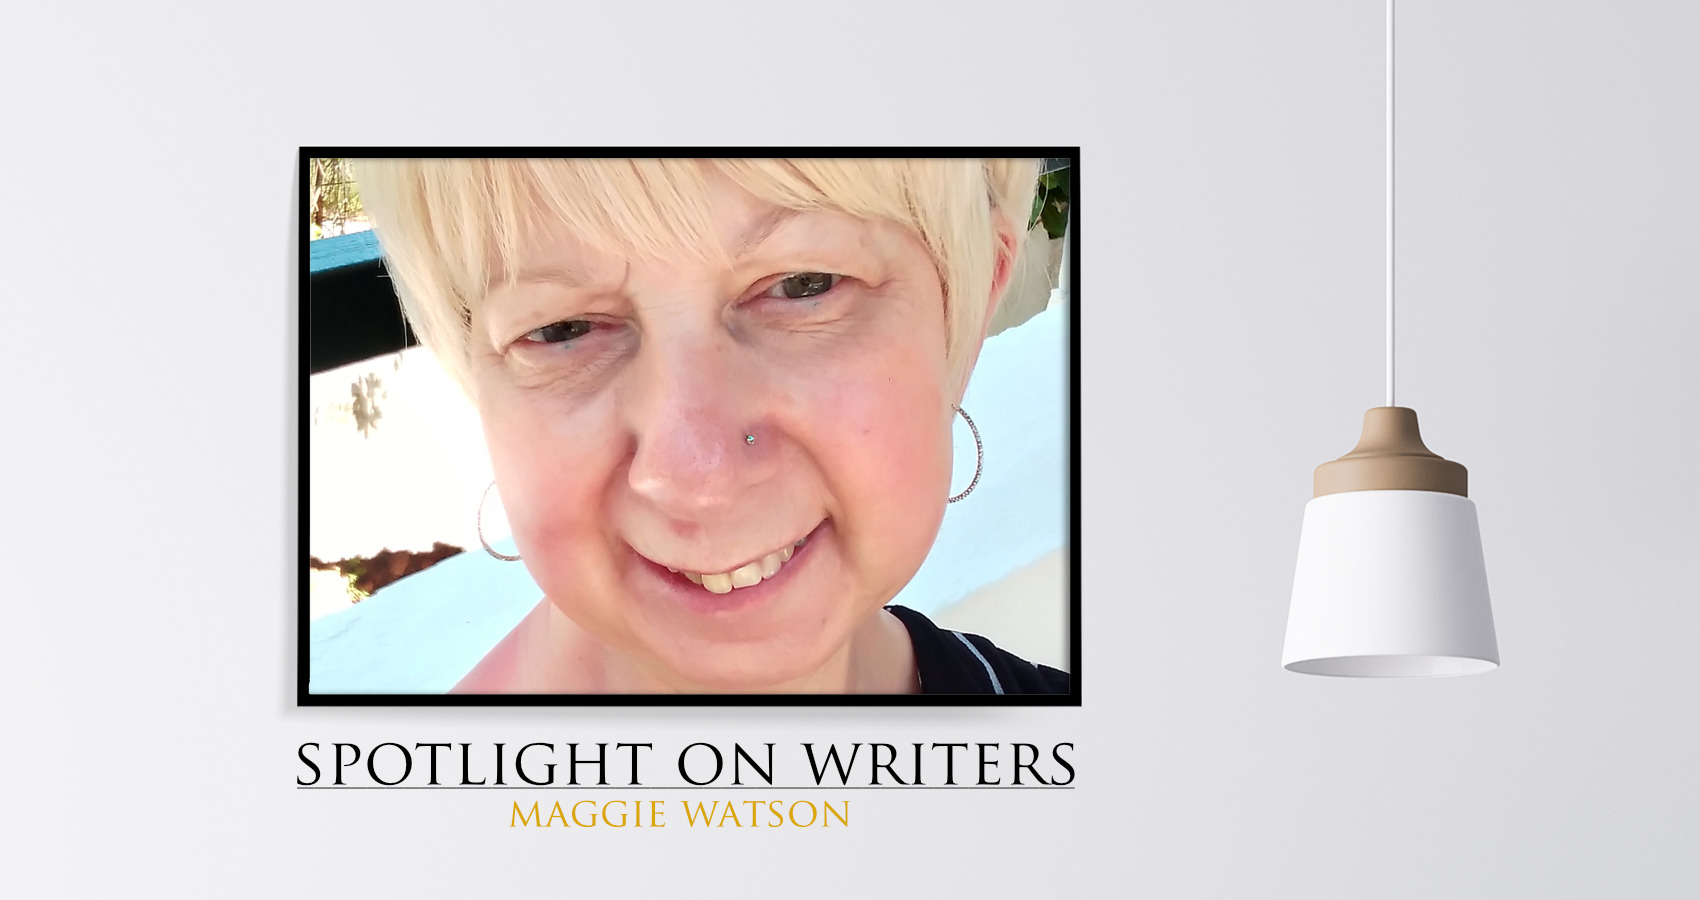 Spotlight On Writers - Maggie Watson, interview at Spillwords.com